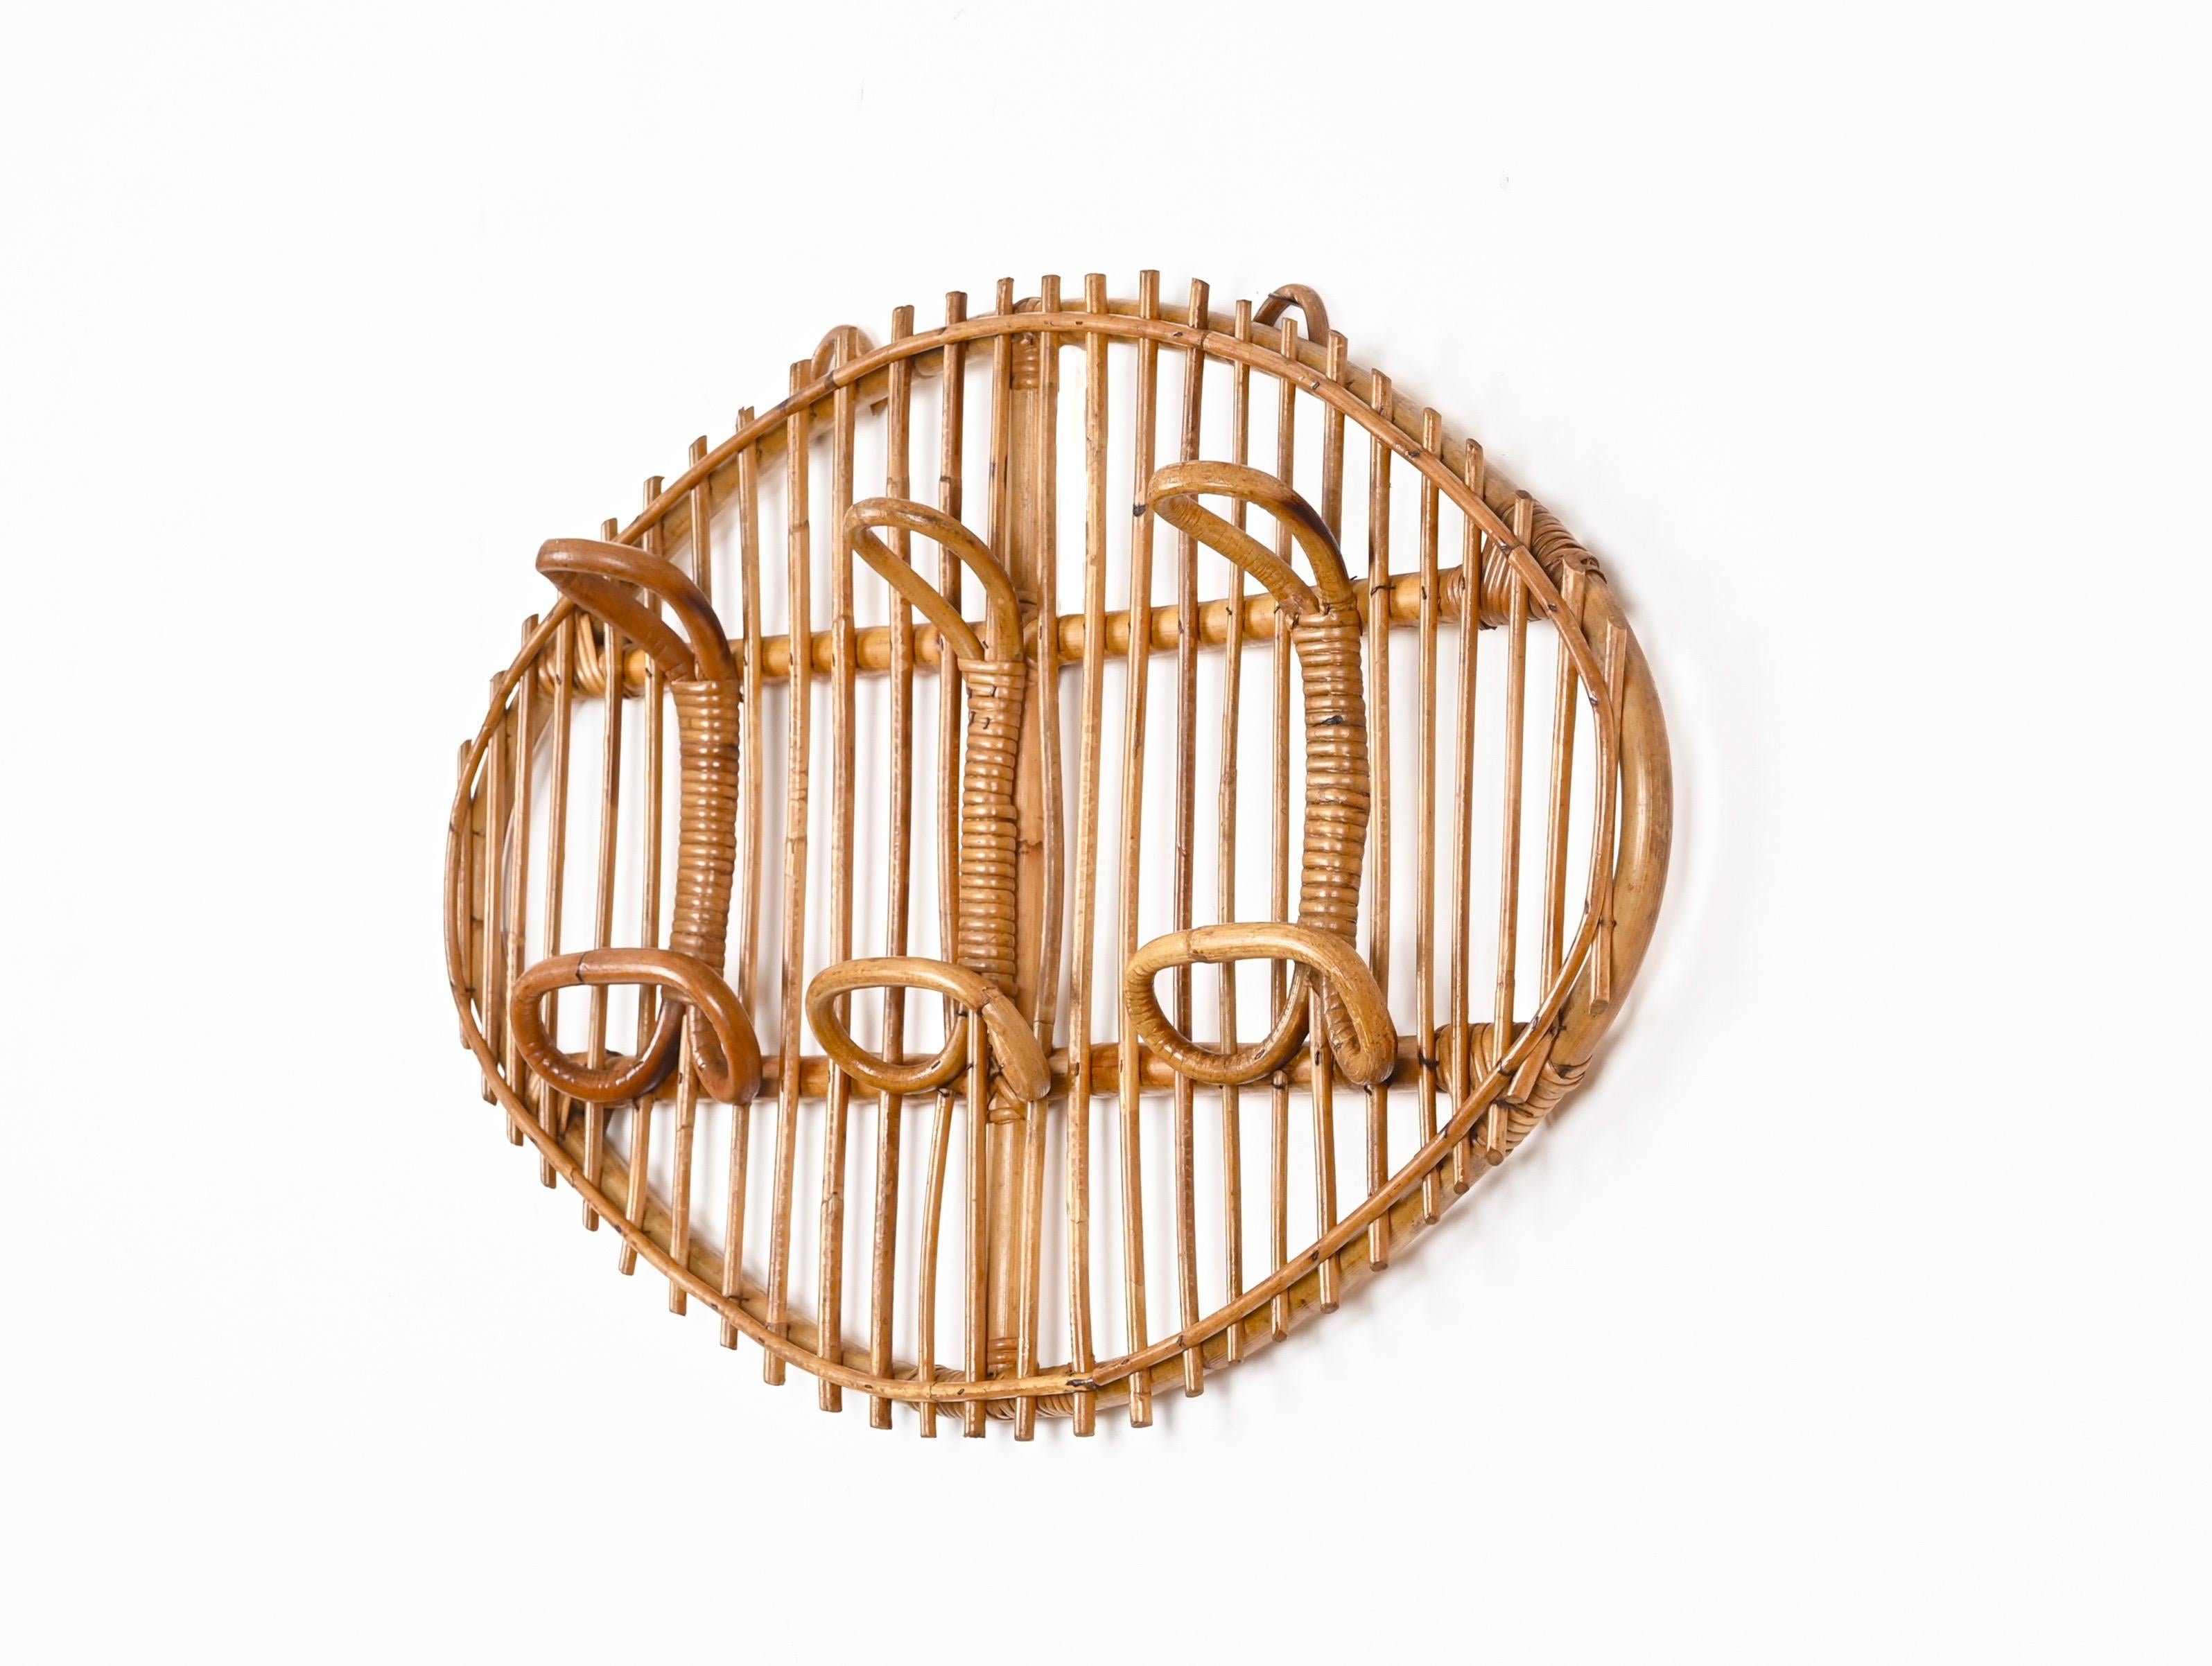 Midcentury French Riviera Rattan, Wicker, Curved Bamboo Coat Rack, Italy 1960s For Sale 3